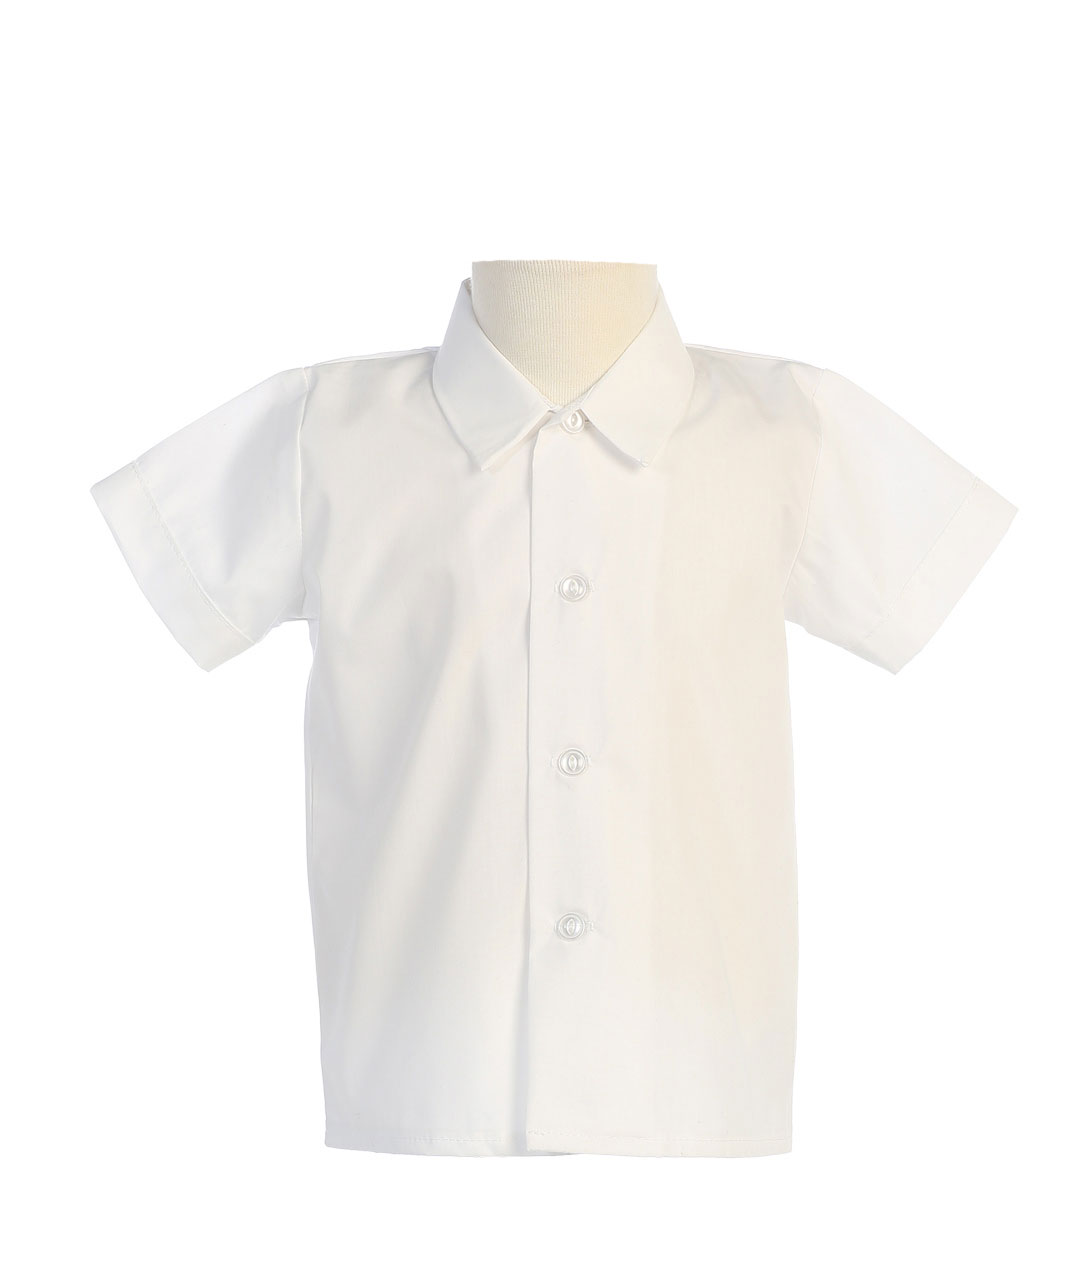 Boys Short Sleeved Simple Dress Shirt - Available in White M